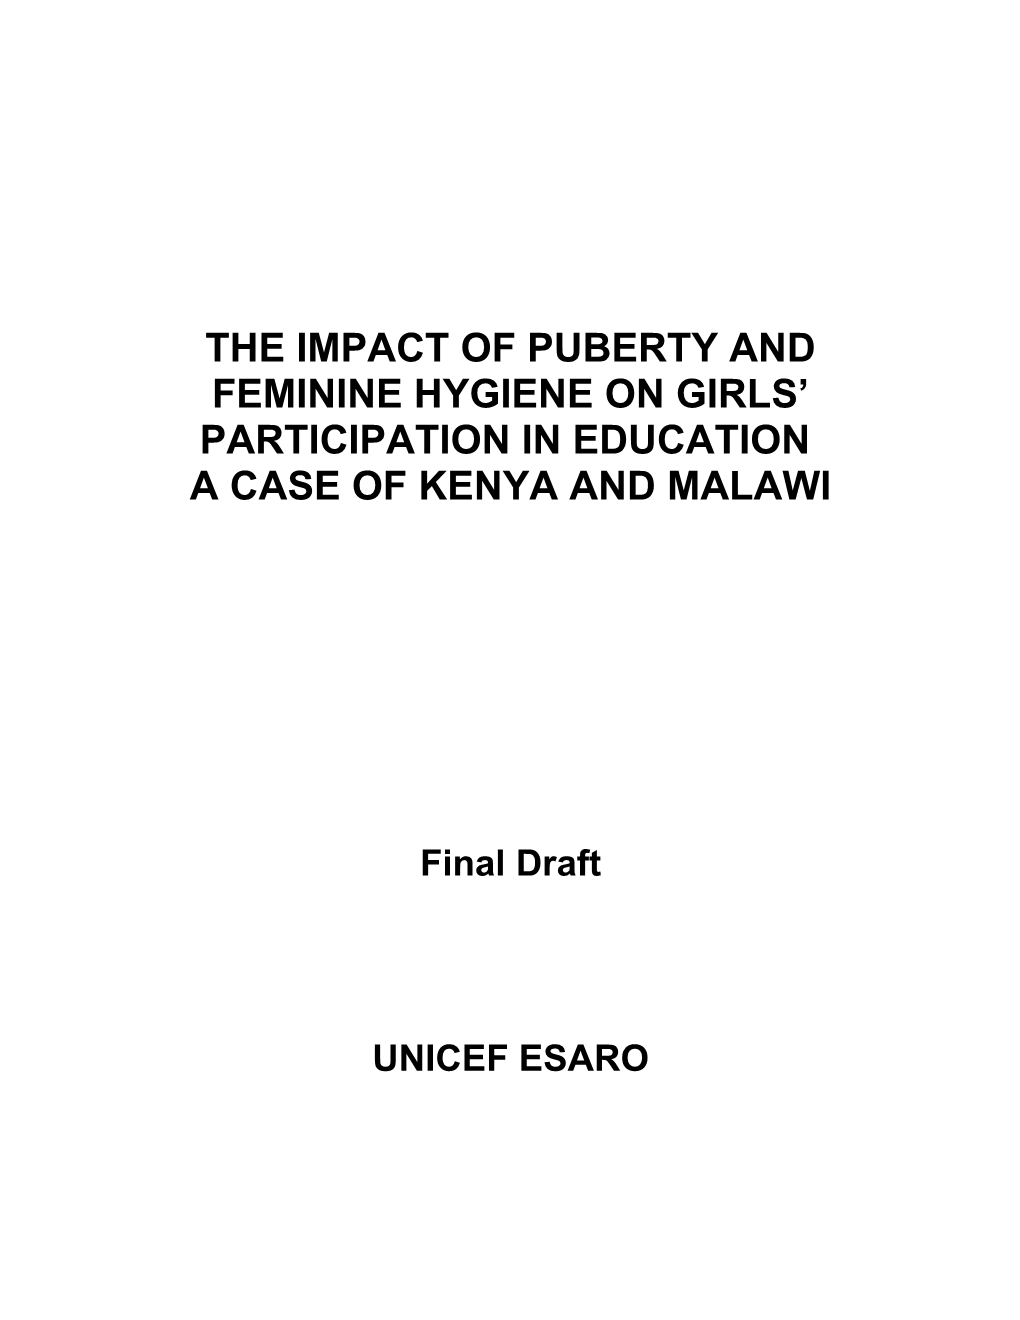 The Impact of Puberty and Feminine Hygiene on Girls Participation in Education